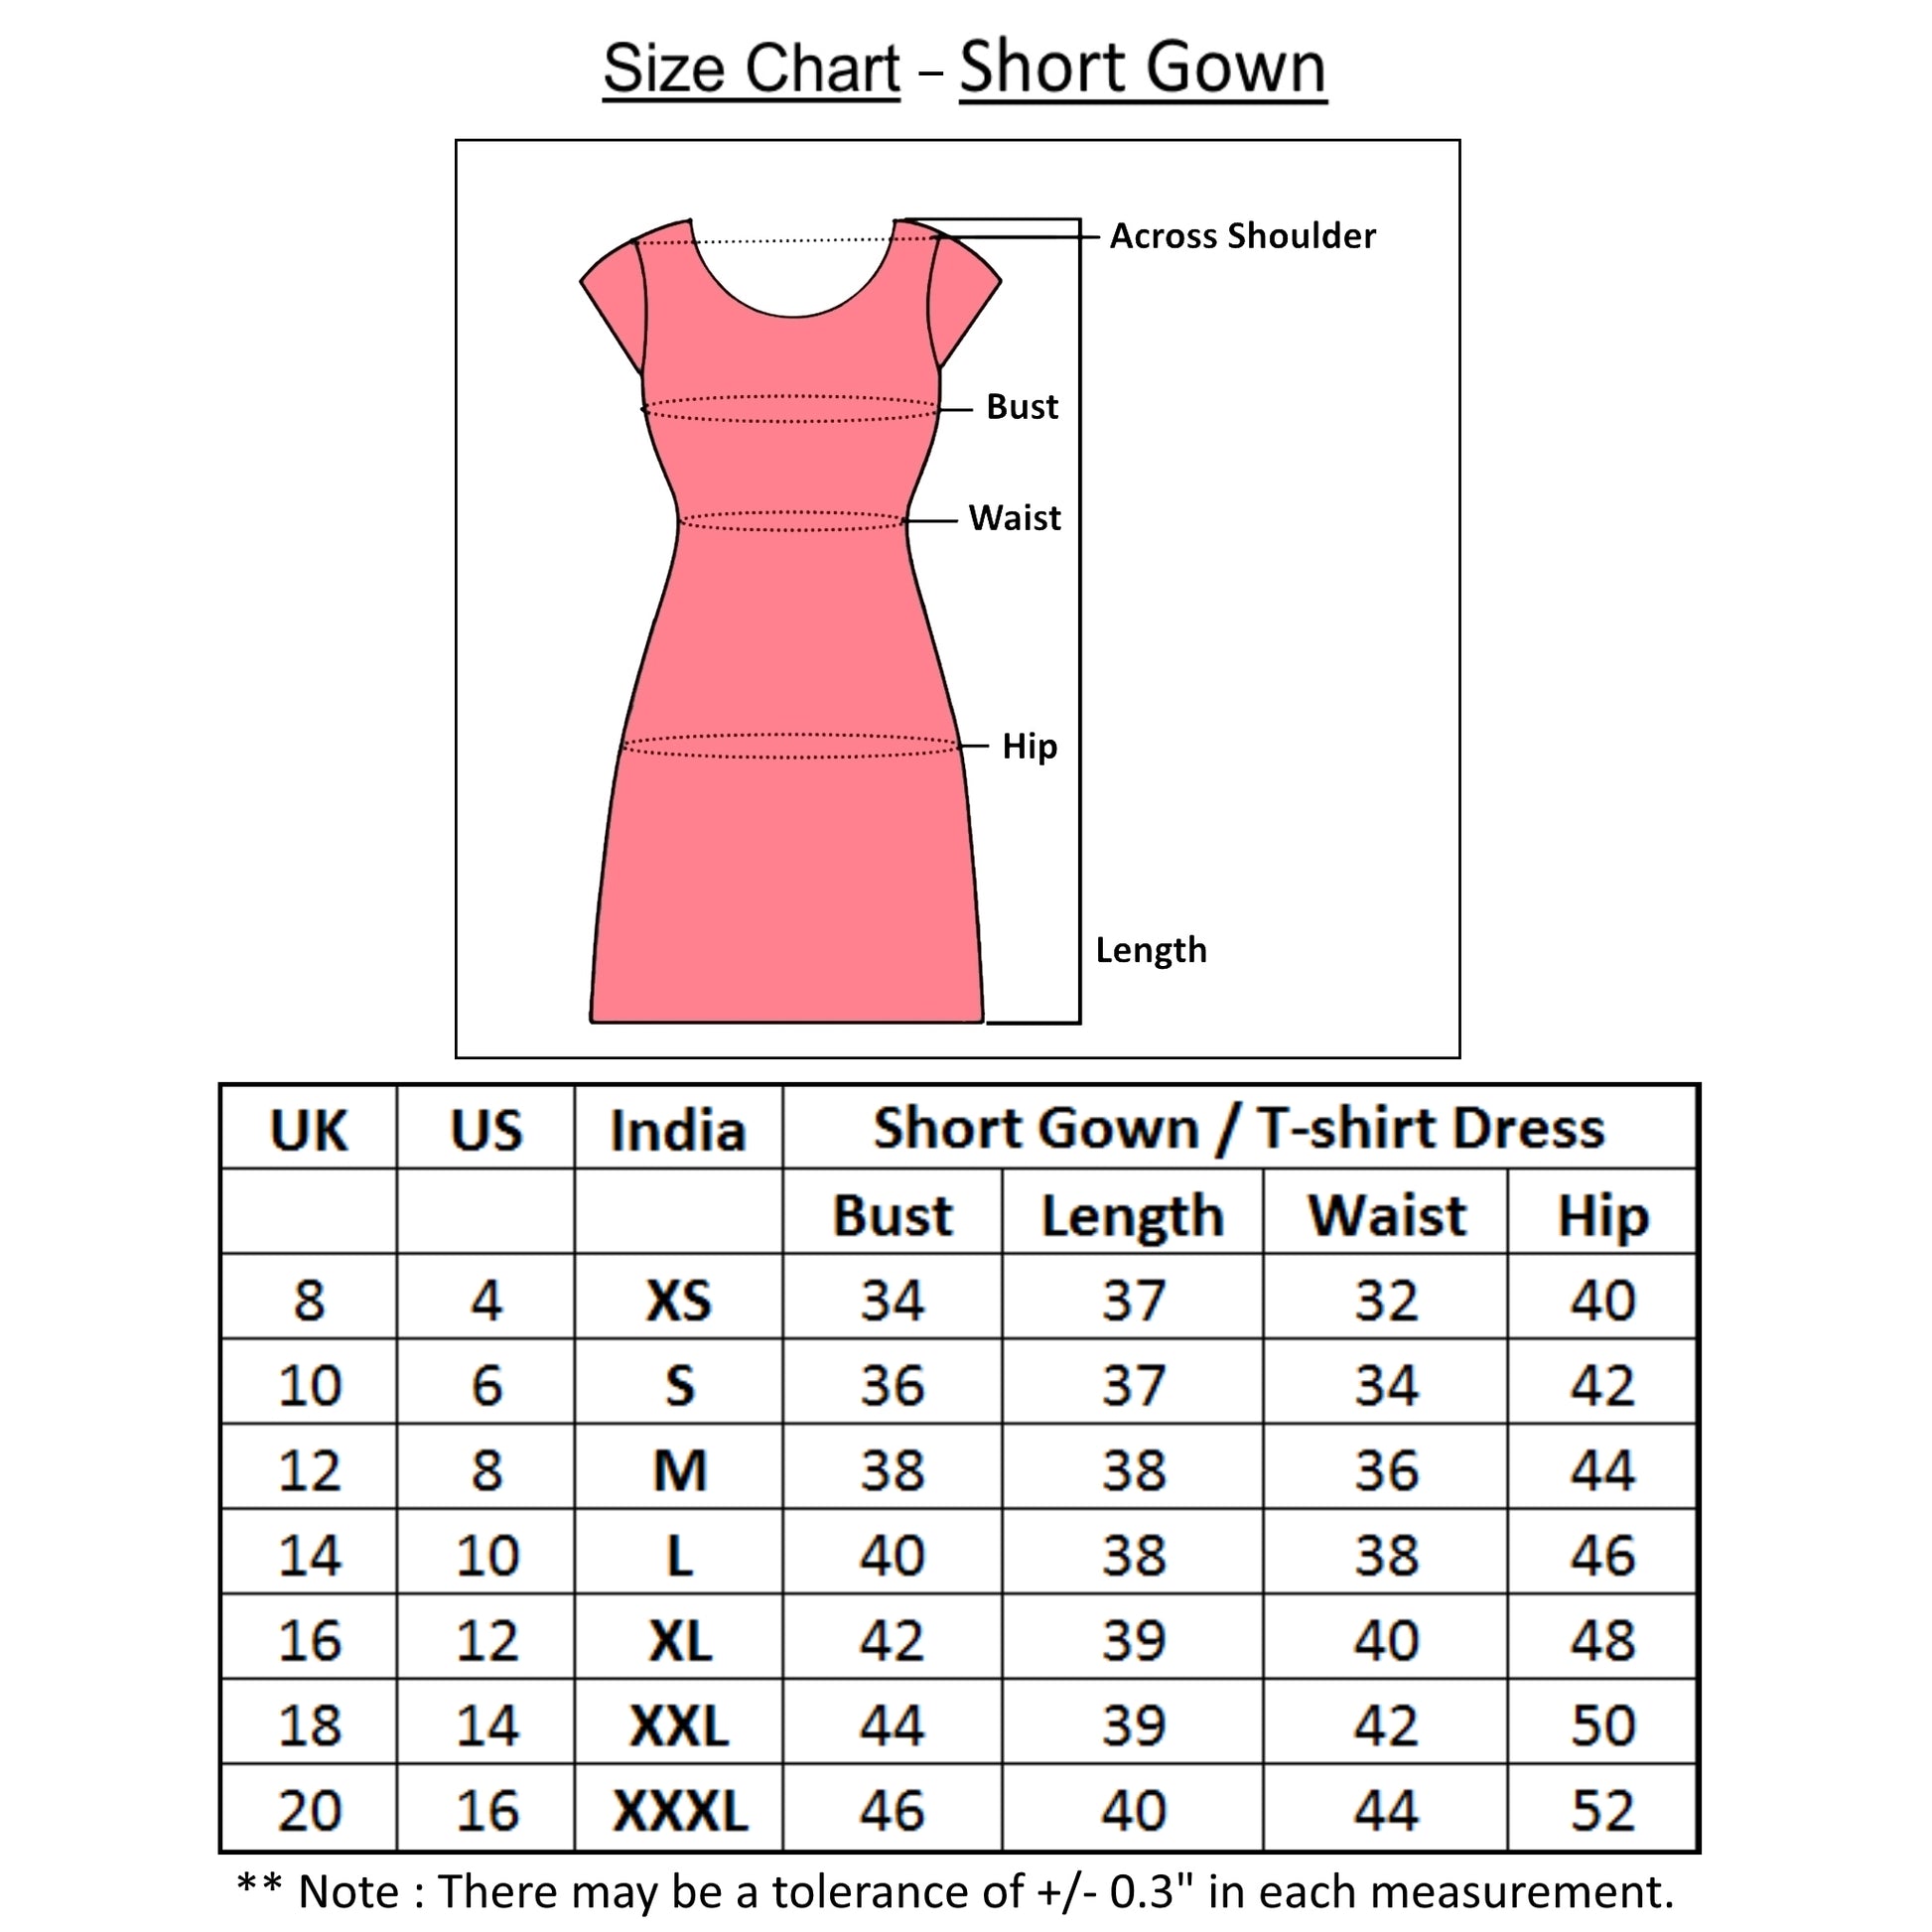 size chart of night short gown with measurement details of all sizes